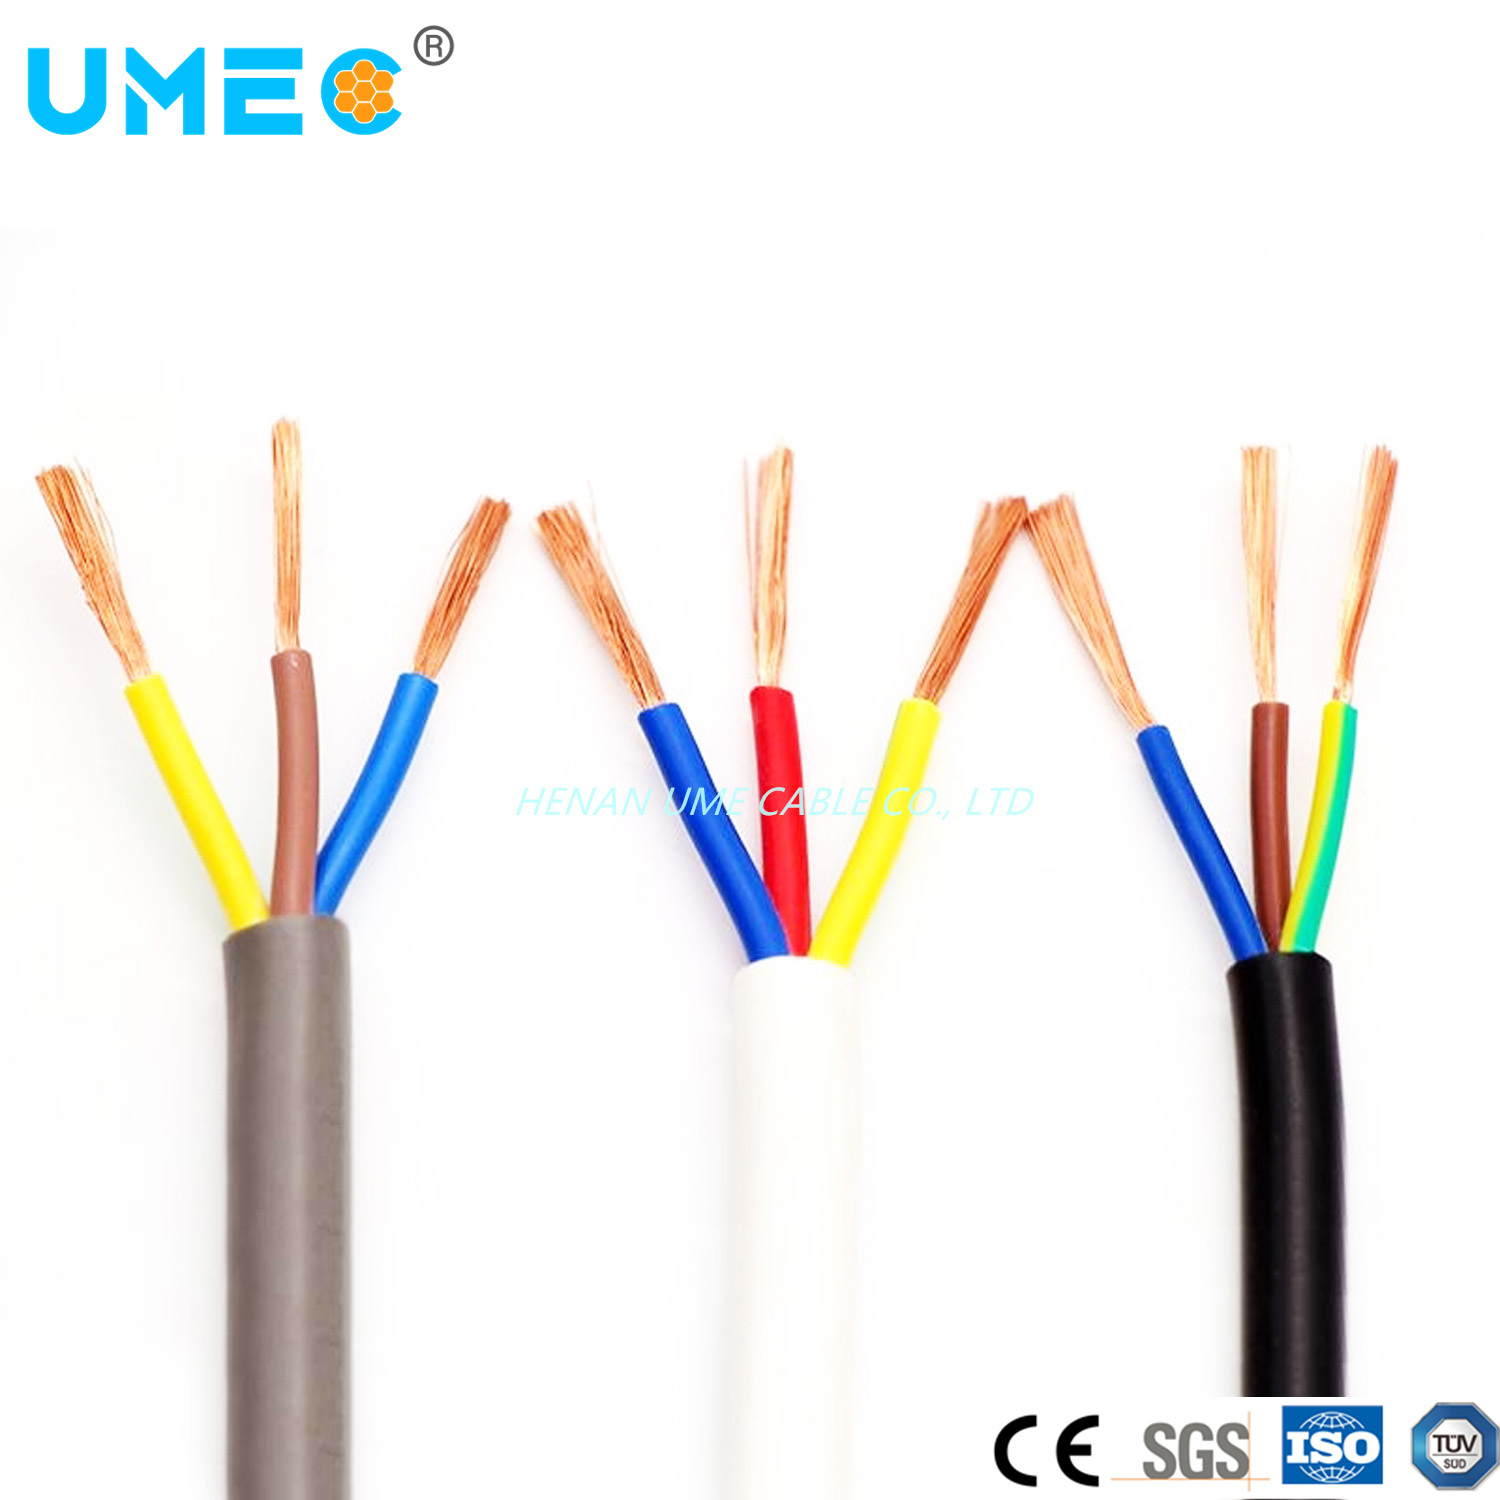 IEC 60227 Standard 450/750V 2X1.0mm2 / 2X2.5 mm2 / 3X0.75mm2 / 3 X 2.5 mm2 Flexible Electrical Cable Wire H05vvf